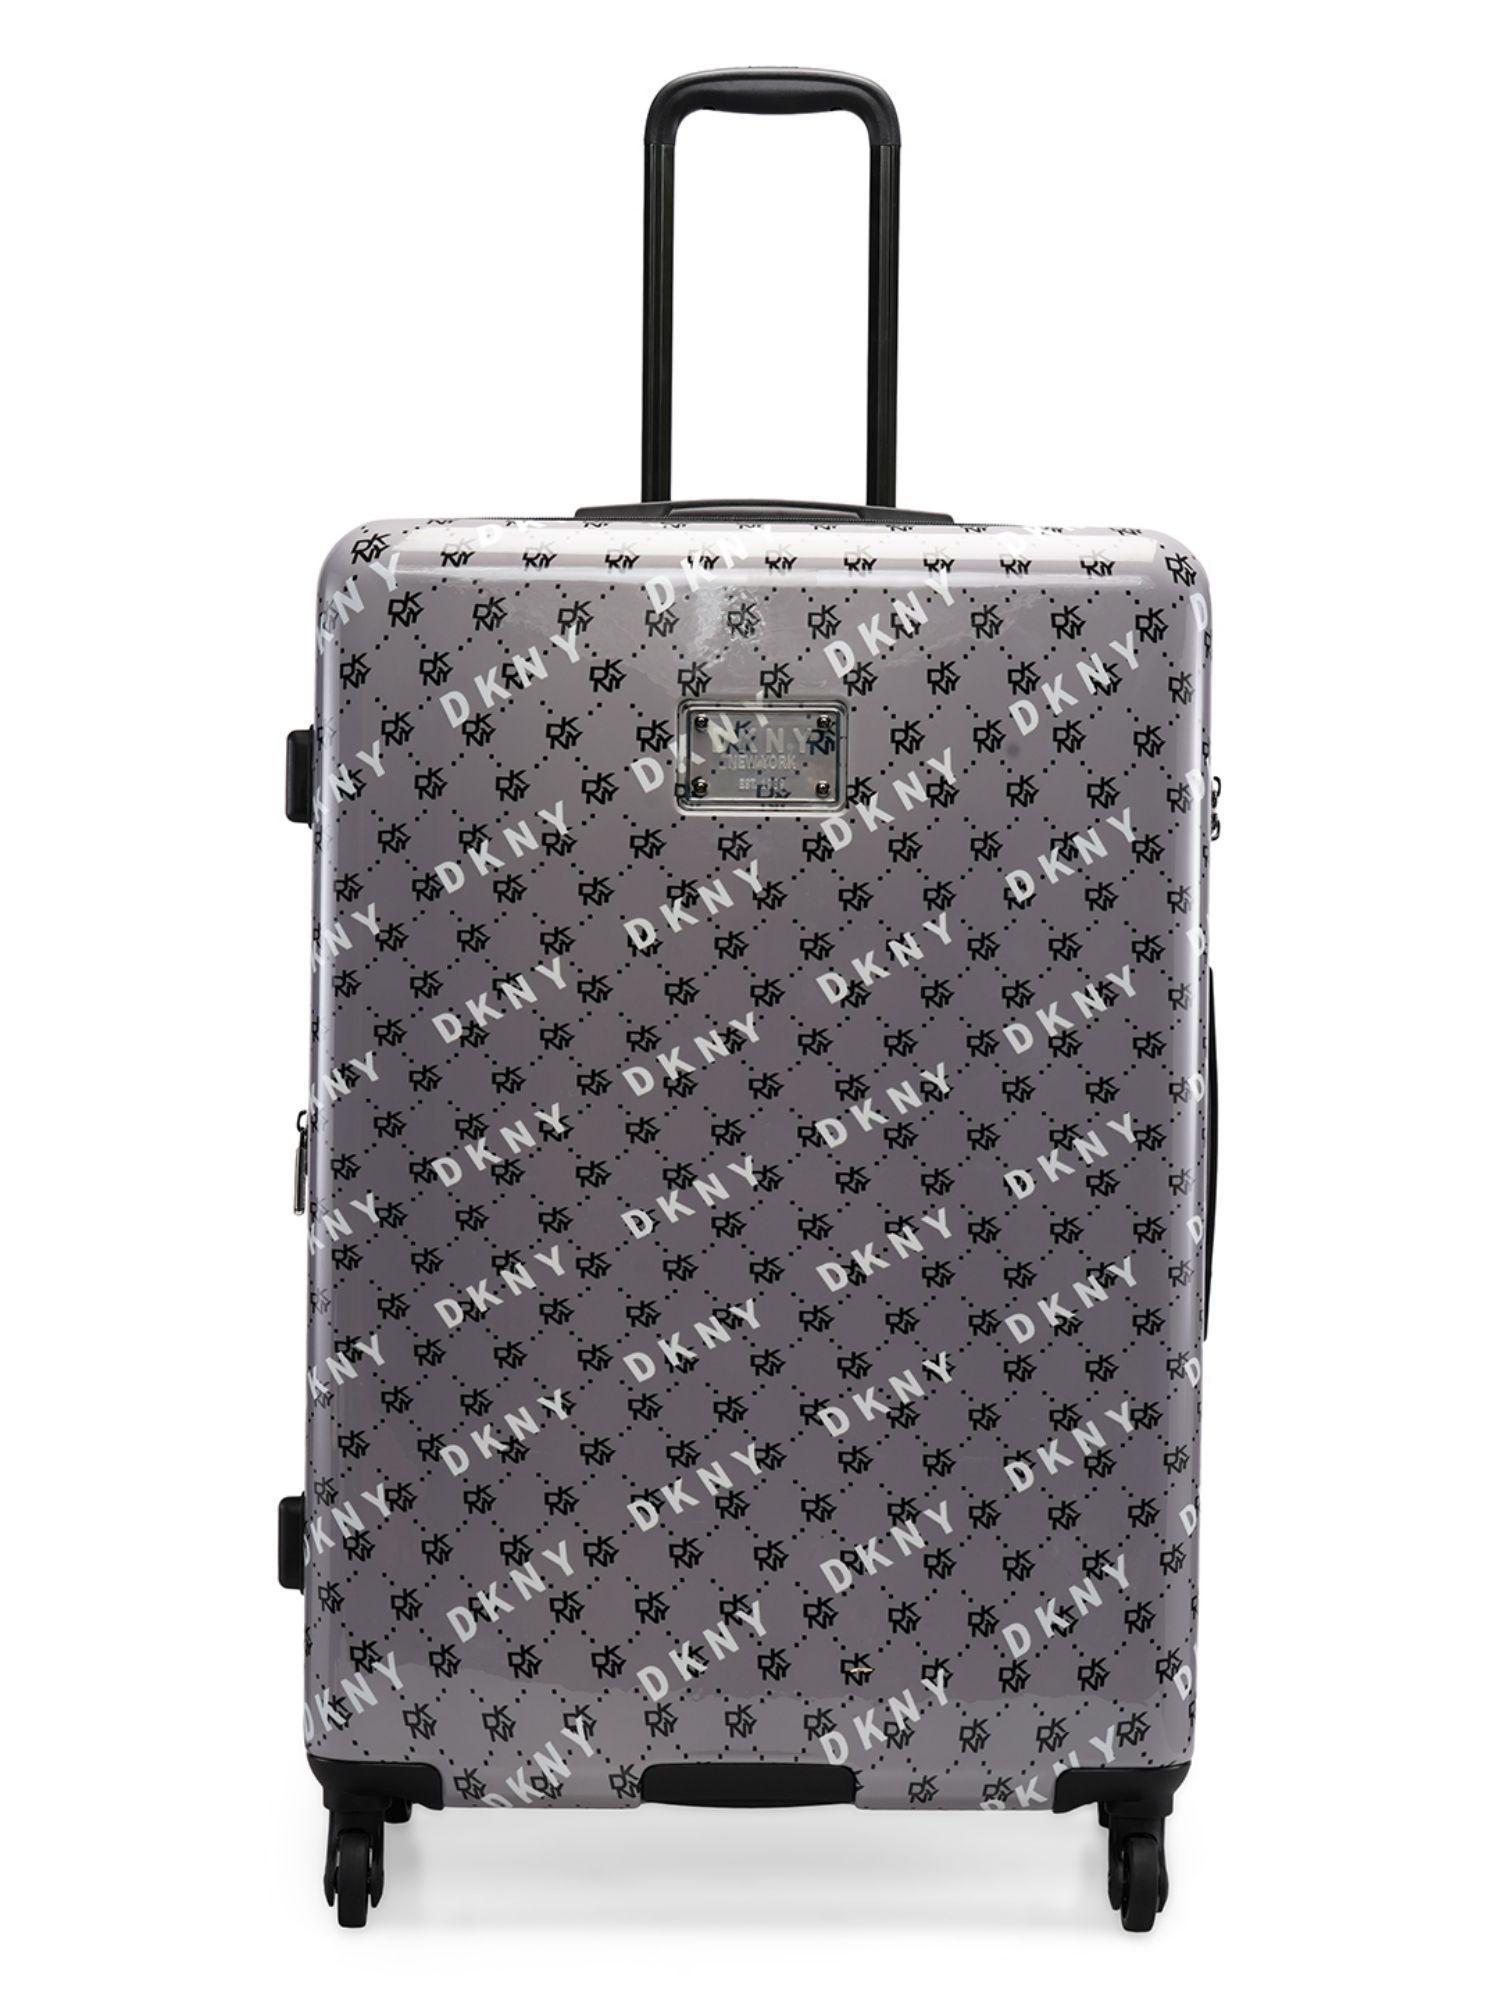 on repeat charcoal color abs material hard 20 inches cabin size trolley